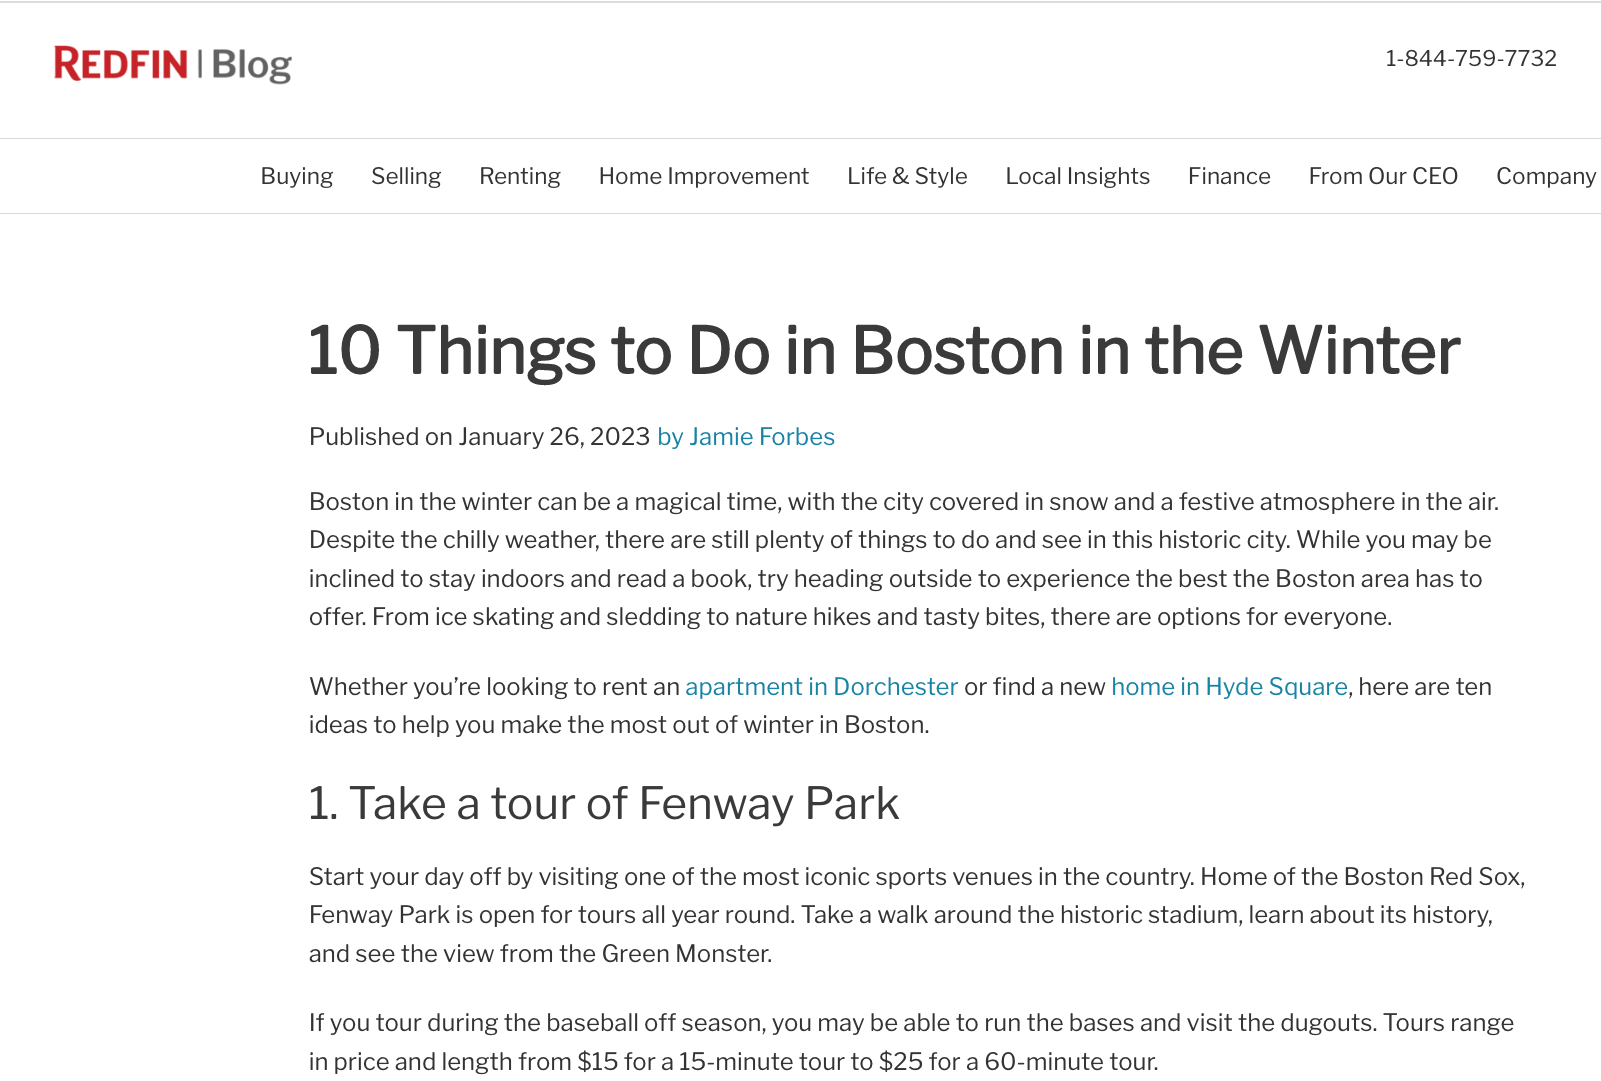 10 Things to Do in Boston in the Winter | Redfin